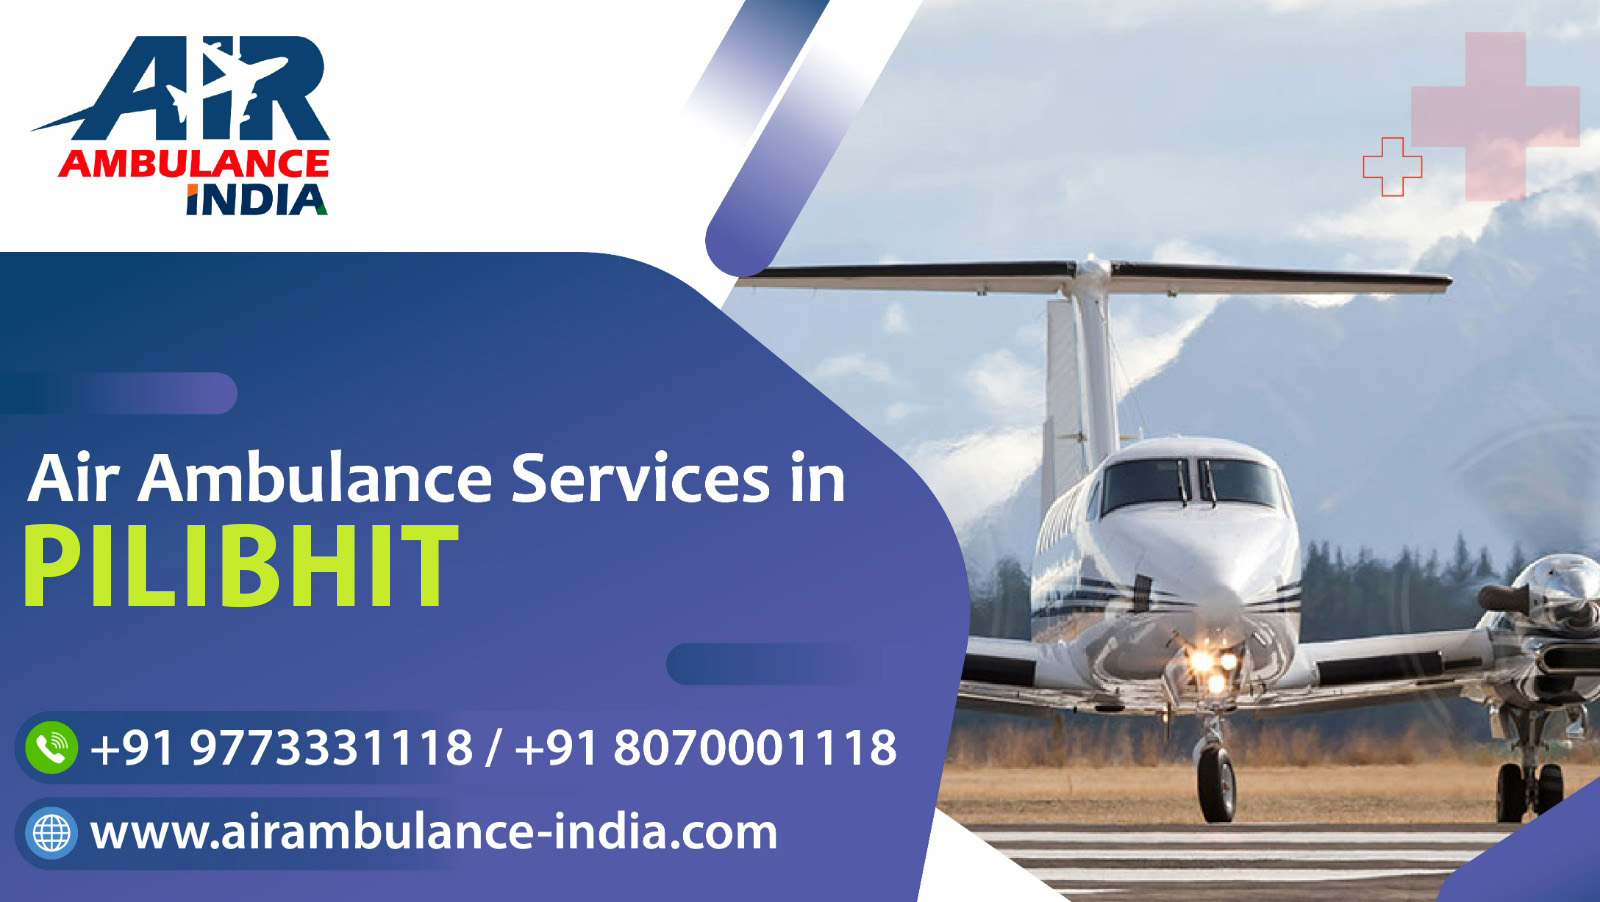 Air Ambulance Services in Pilibhit